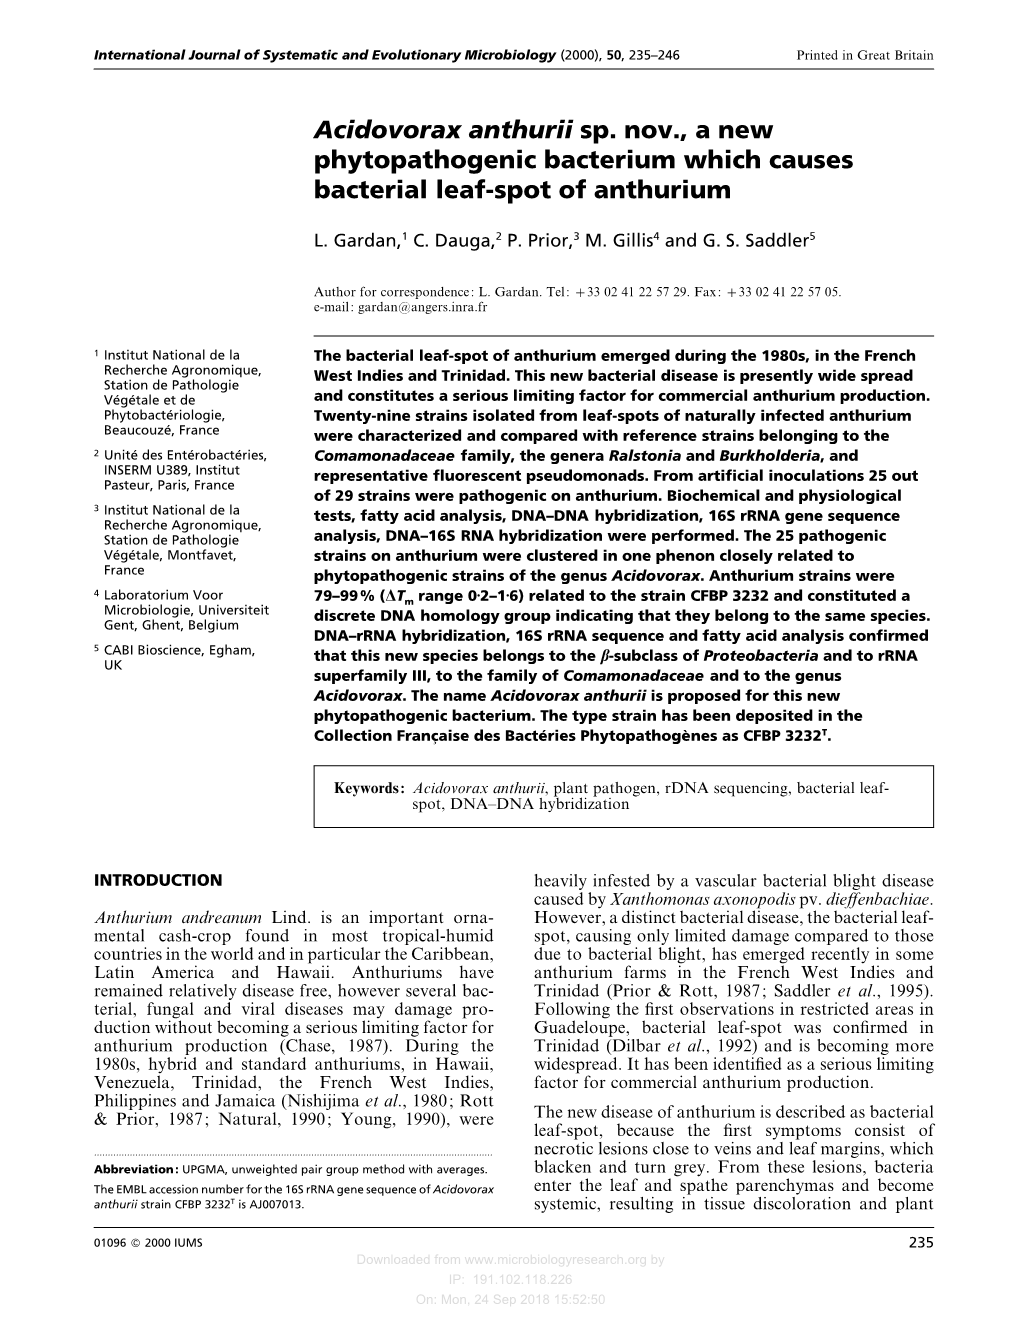 Acidovorax Anthurii Sp. Nov., a New Phytopathogenic Bacterium Which Causes Bacterial Leaf-Spot of Anthurium